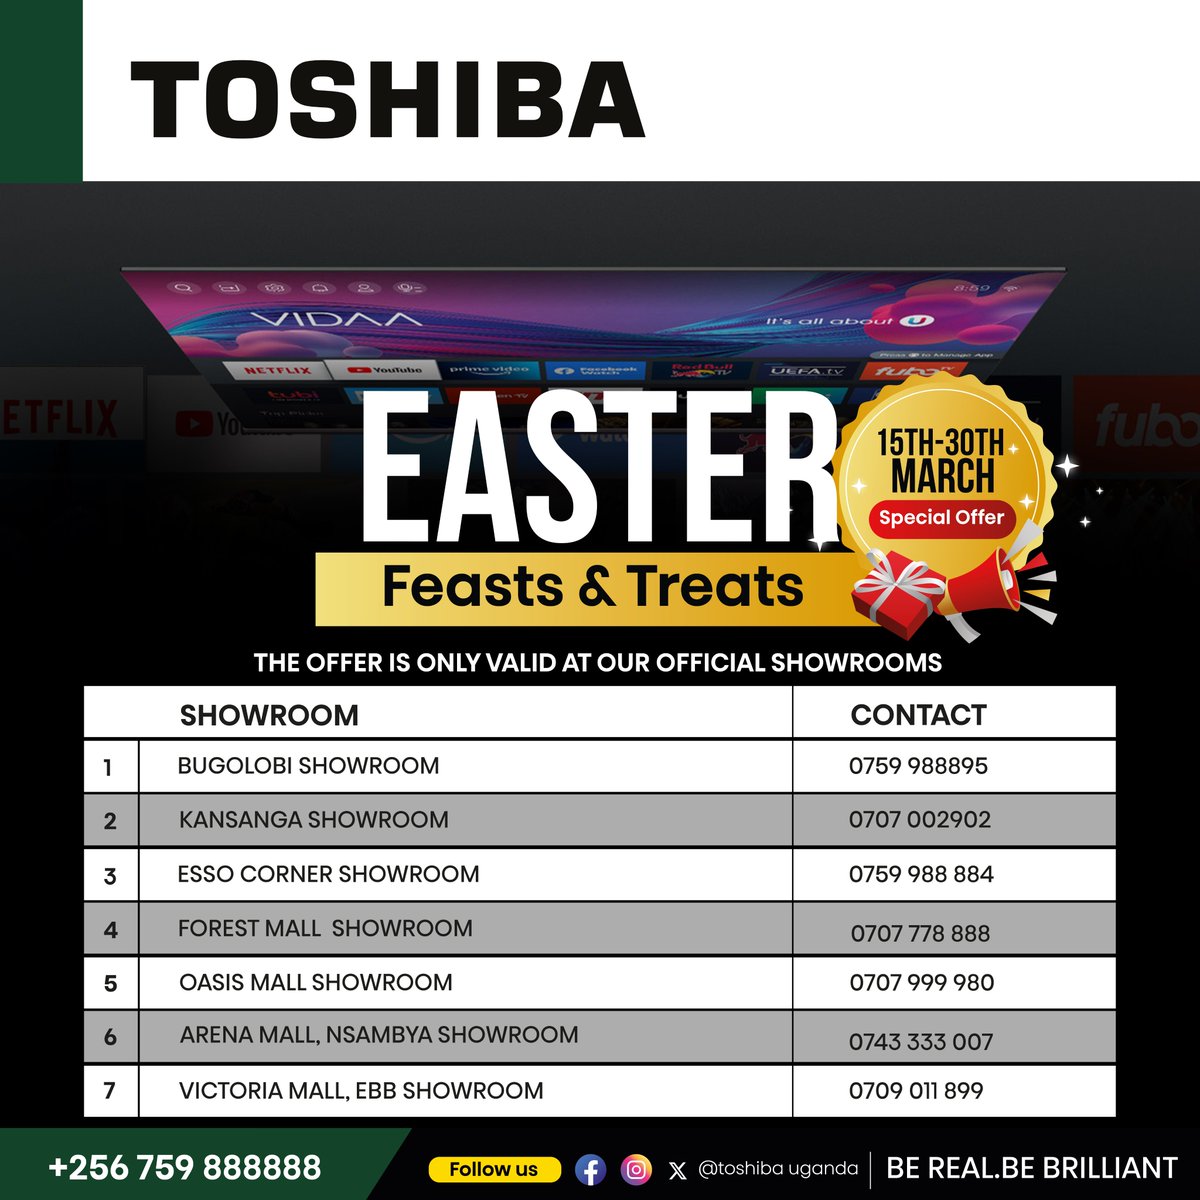 Easter has been made so special and exciting with the best Tv offers. Come through to any of our showrooms and grab your self a TV set while stock still lasts.
For more info contact us on 0759 888 888.
#toshibatvug  #EasterSavings  #Feastsandtreats